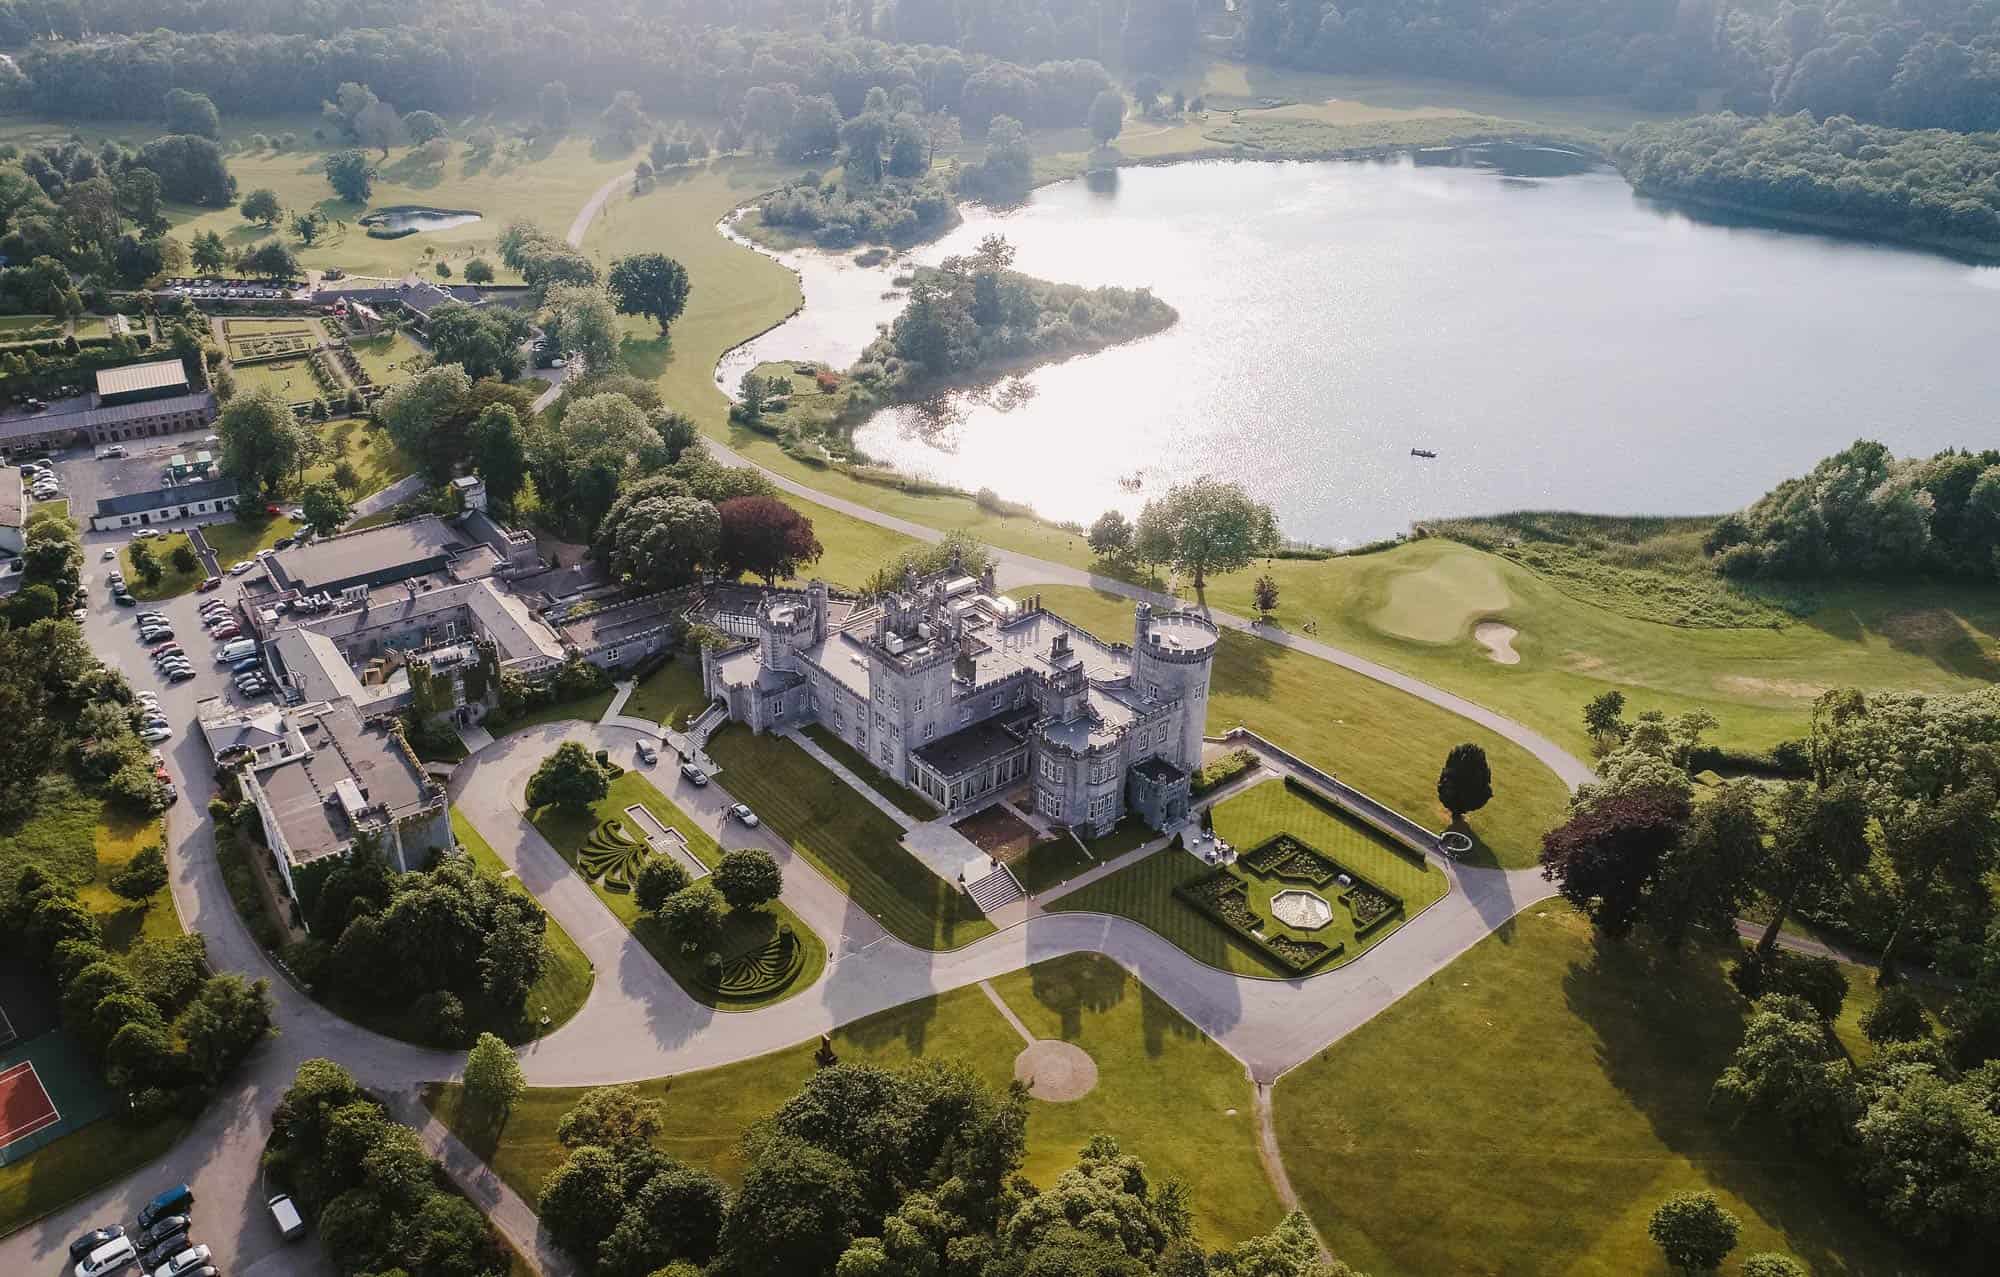 Dromoland Castle Ireland from the air